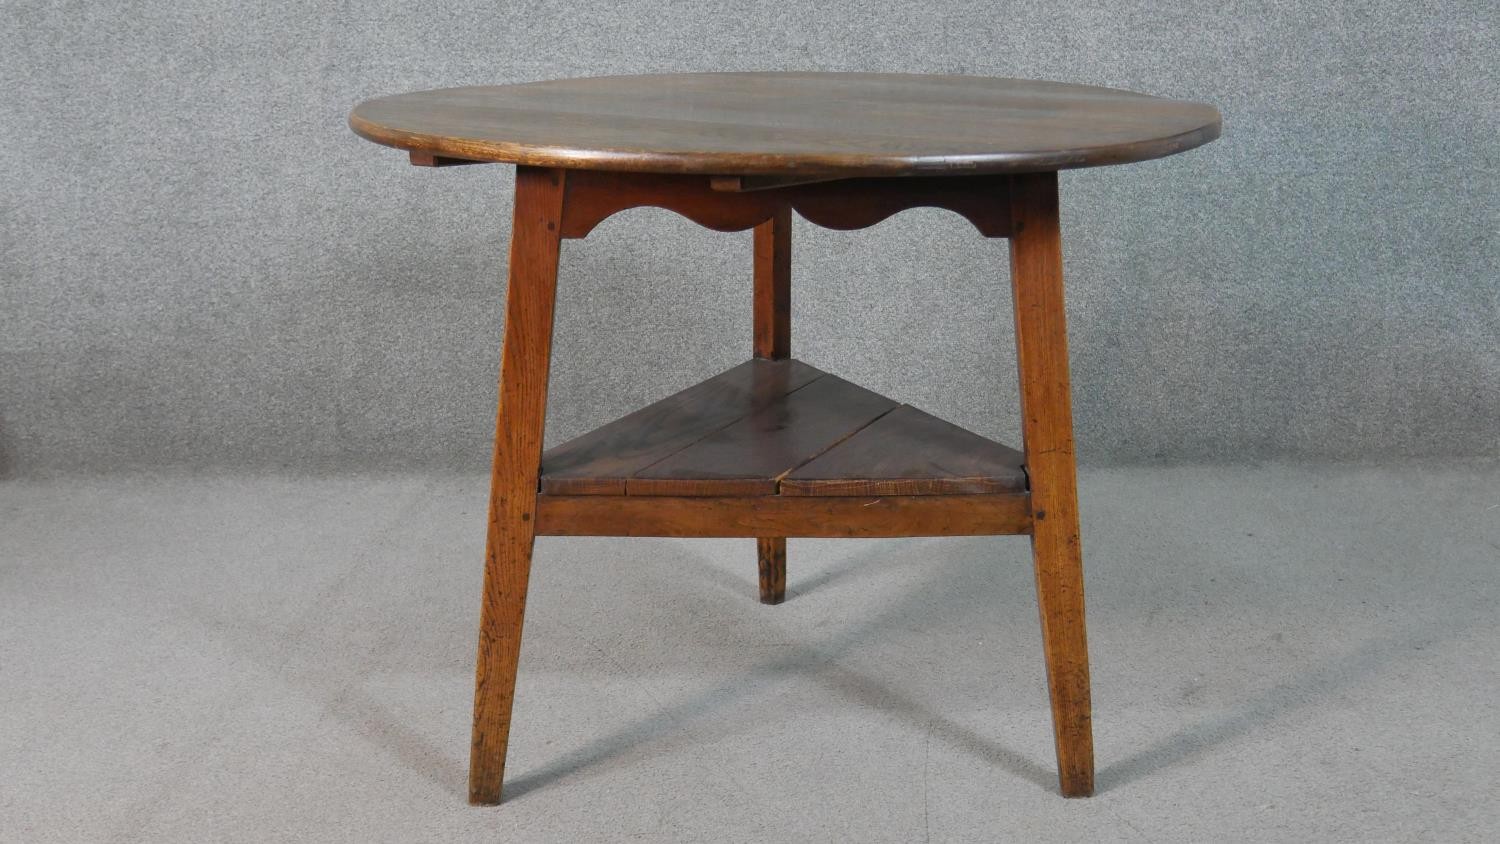 A 19th century country oak cricket table with shaped frieze on splay supports united by an